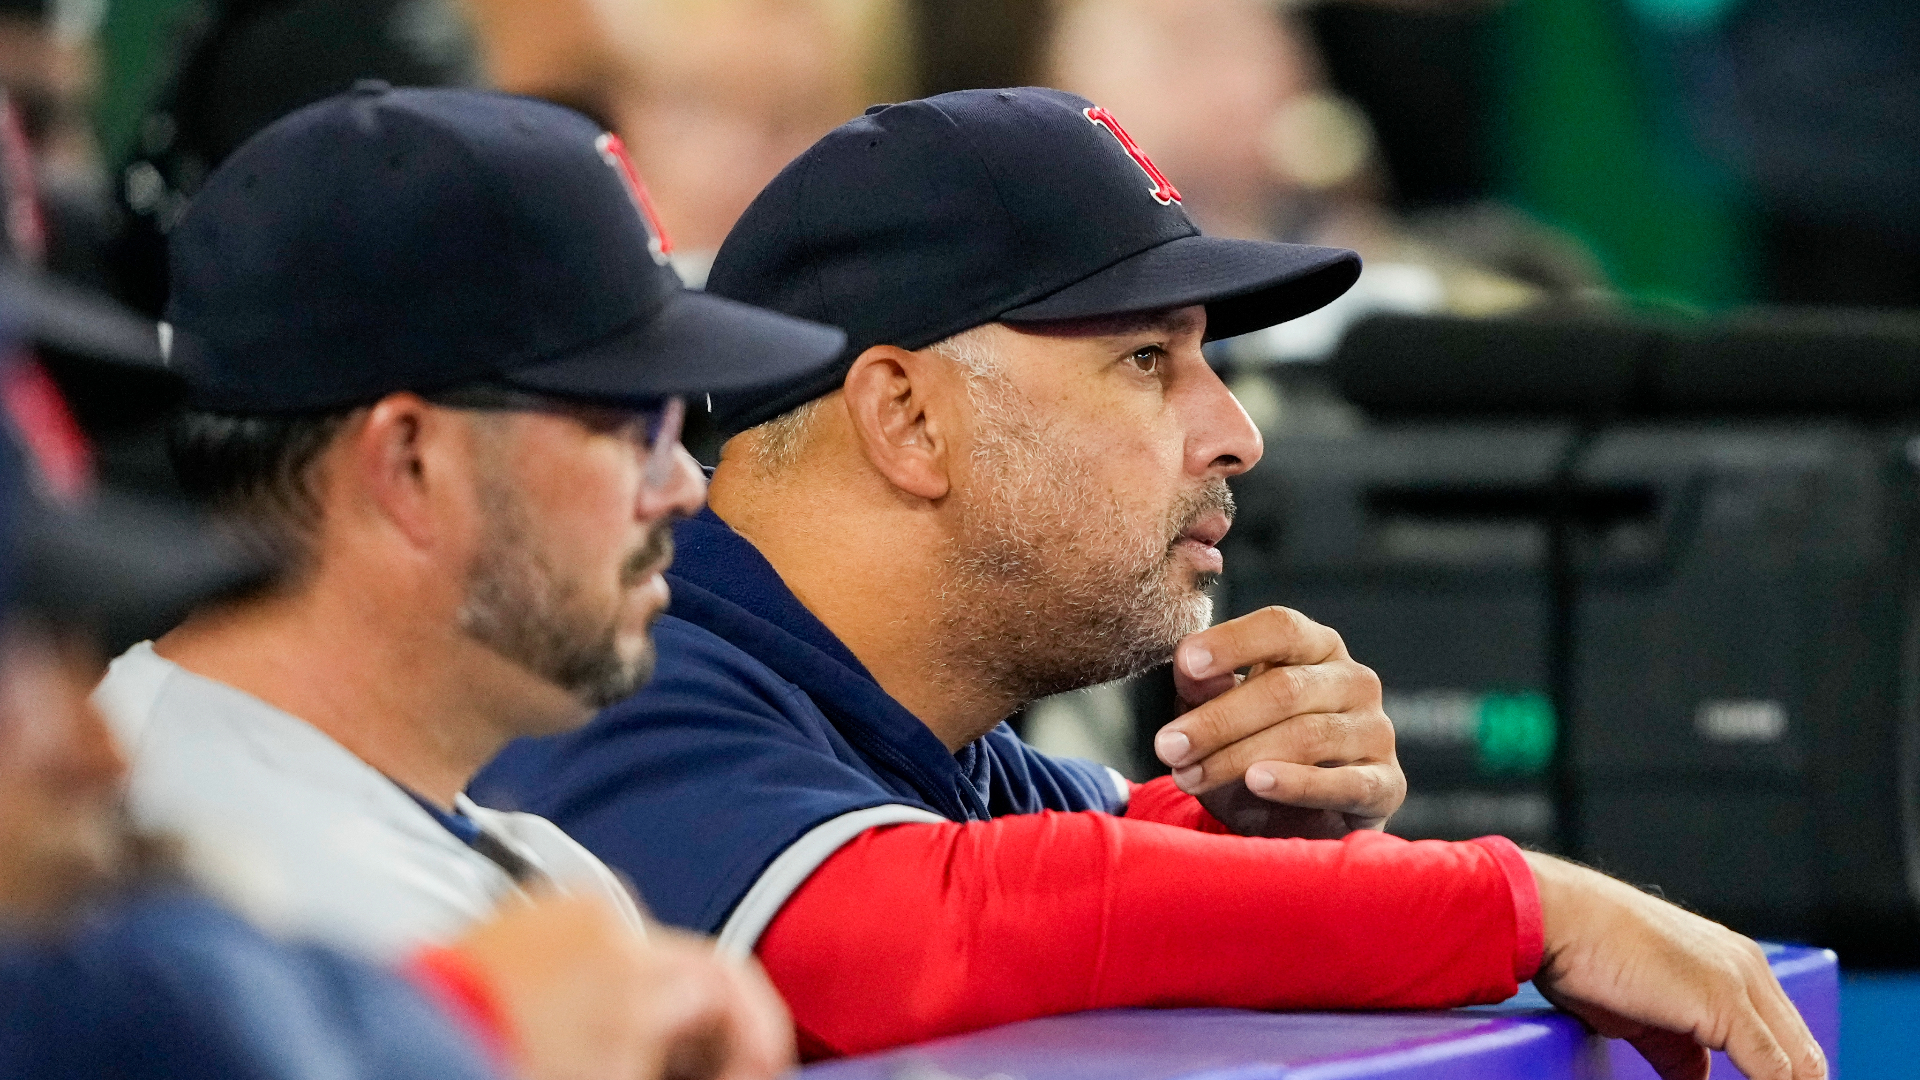 Alex Cora says he'll be back as Red Sox skipper in 2024